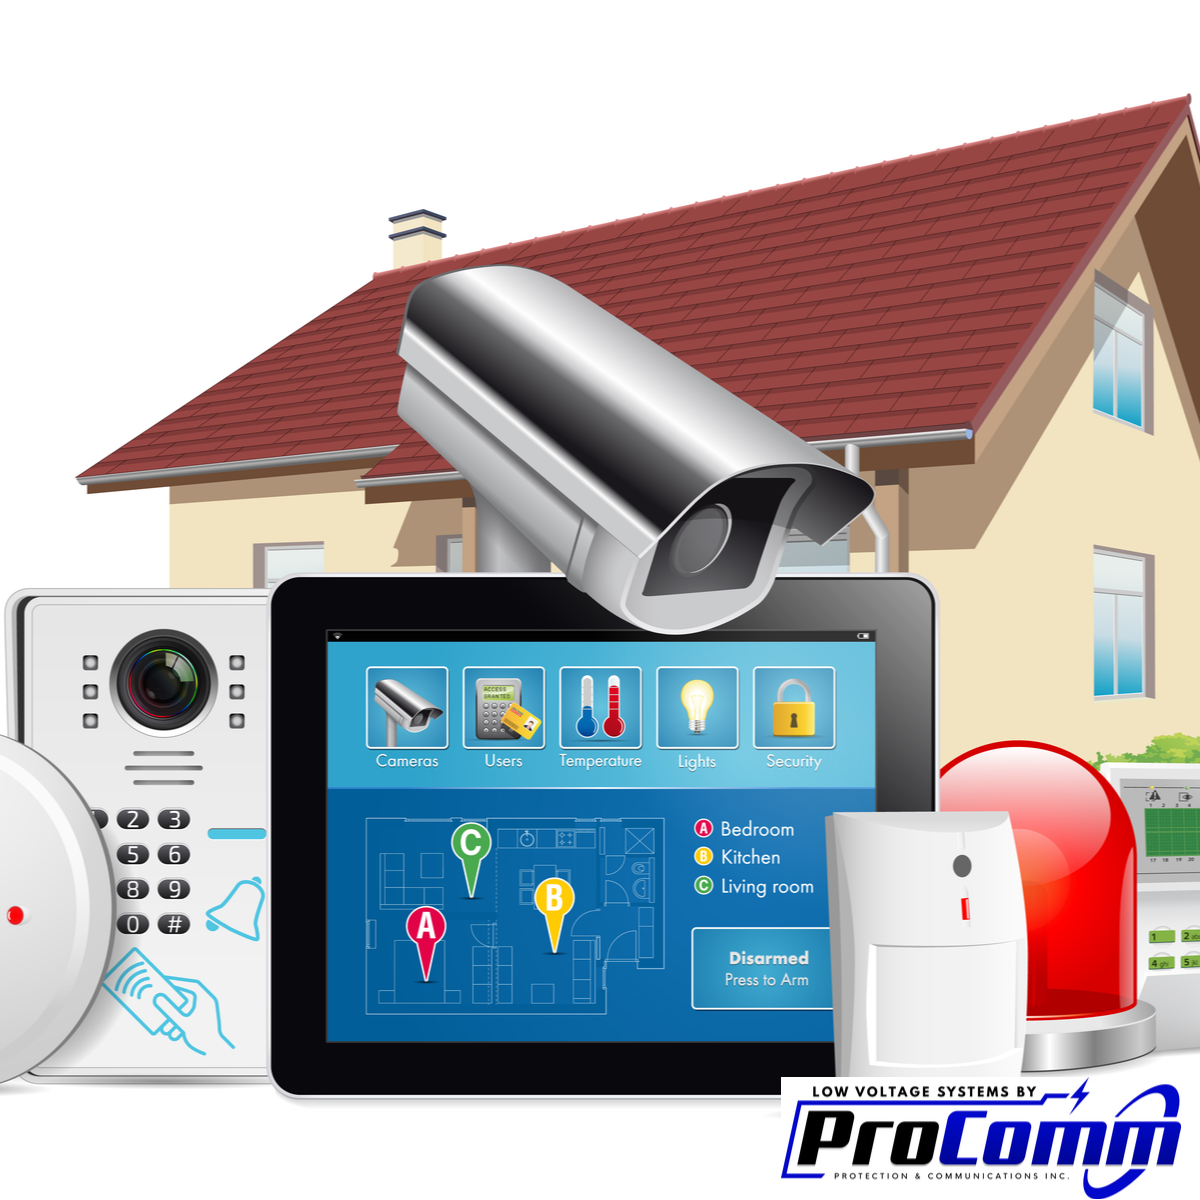 Is Pro-Comm Available for Security System Installation in Bellevue?